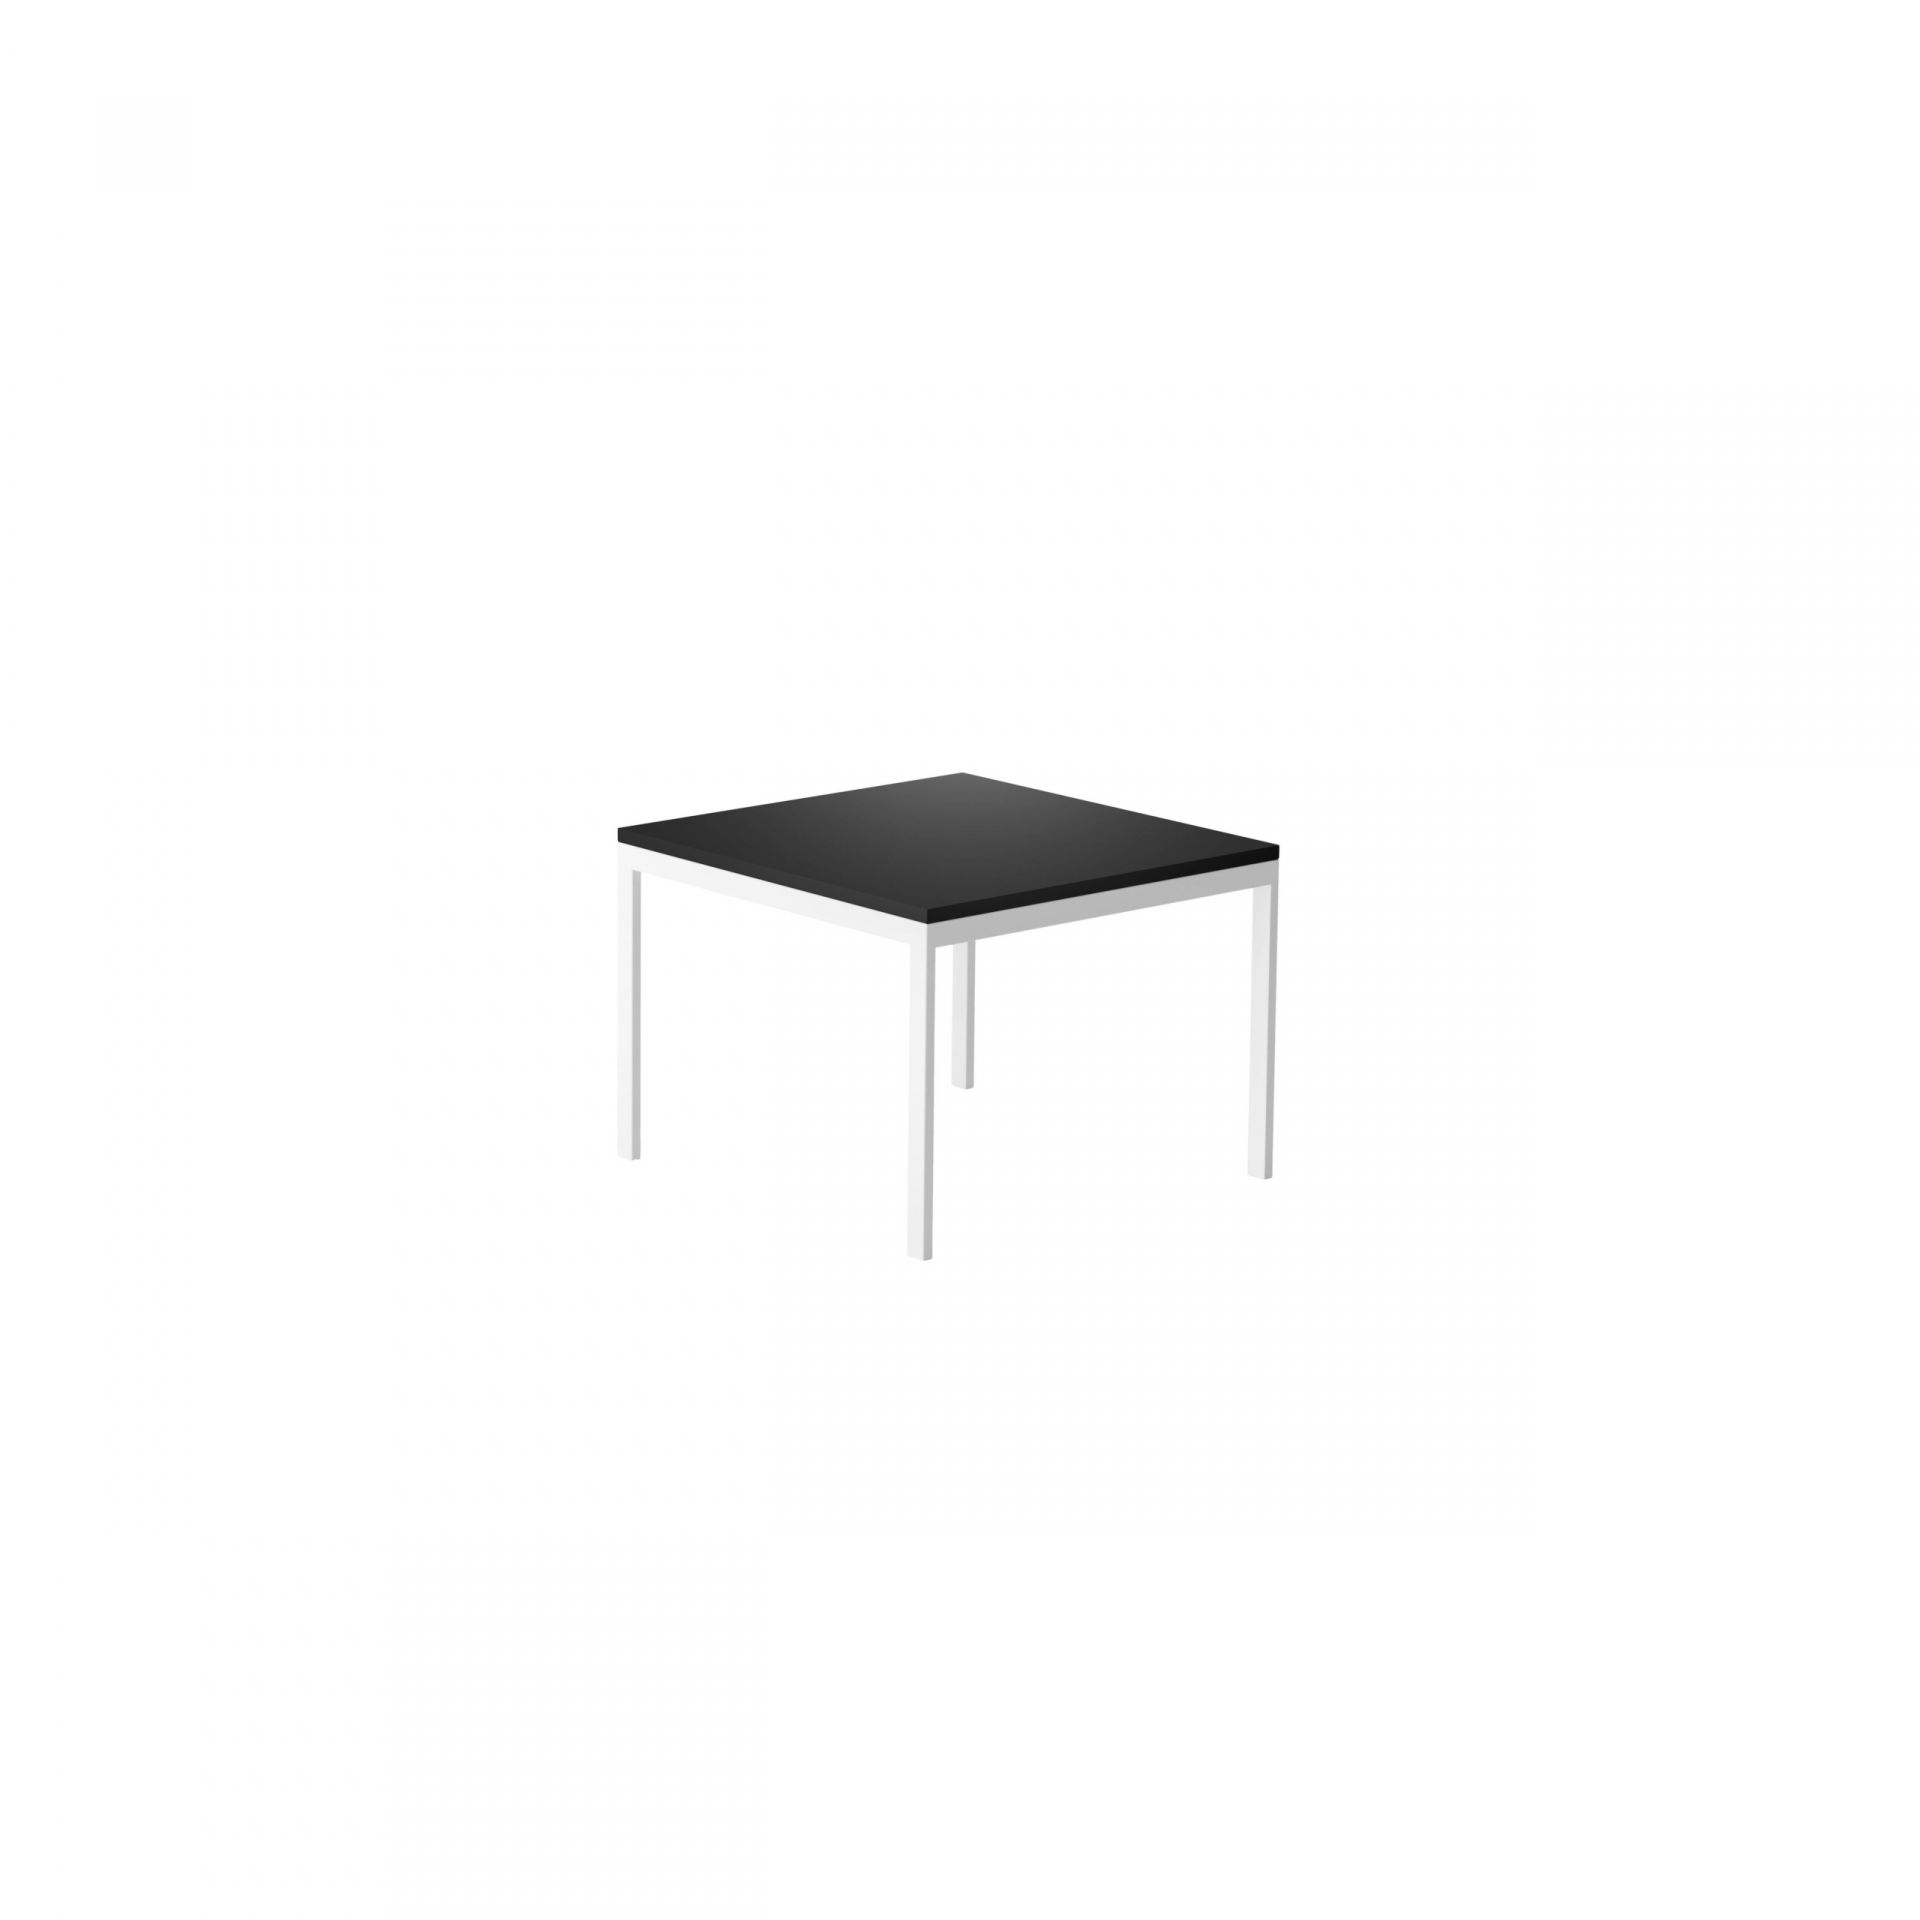 Create Seating Lounge table product image 1